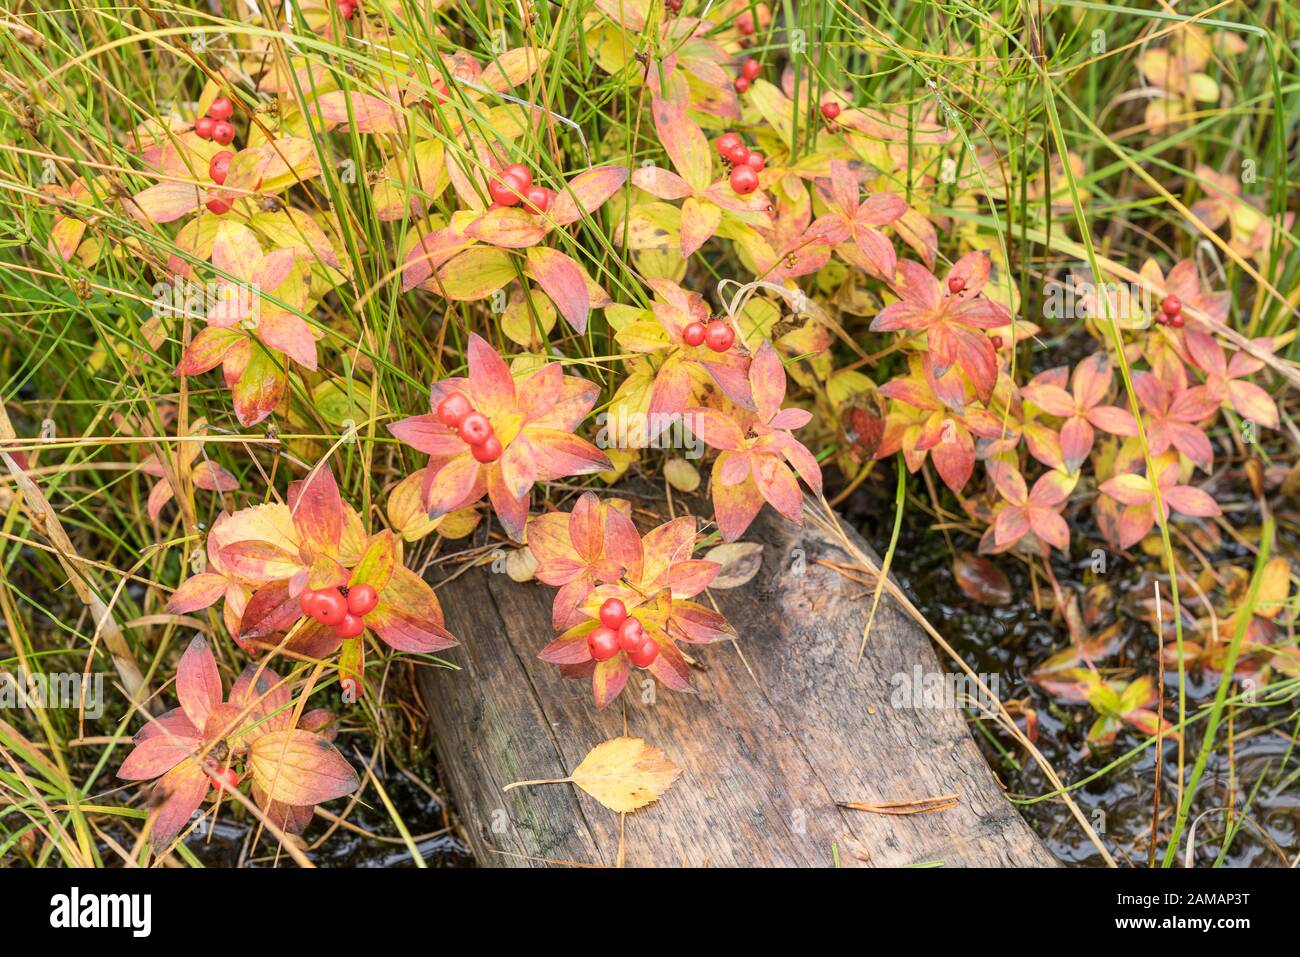 Bearberry in autumn. Fall colors - ruska time in Lapland. Finland, Nordic countries in Europe Stock Photo